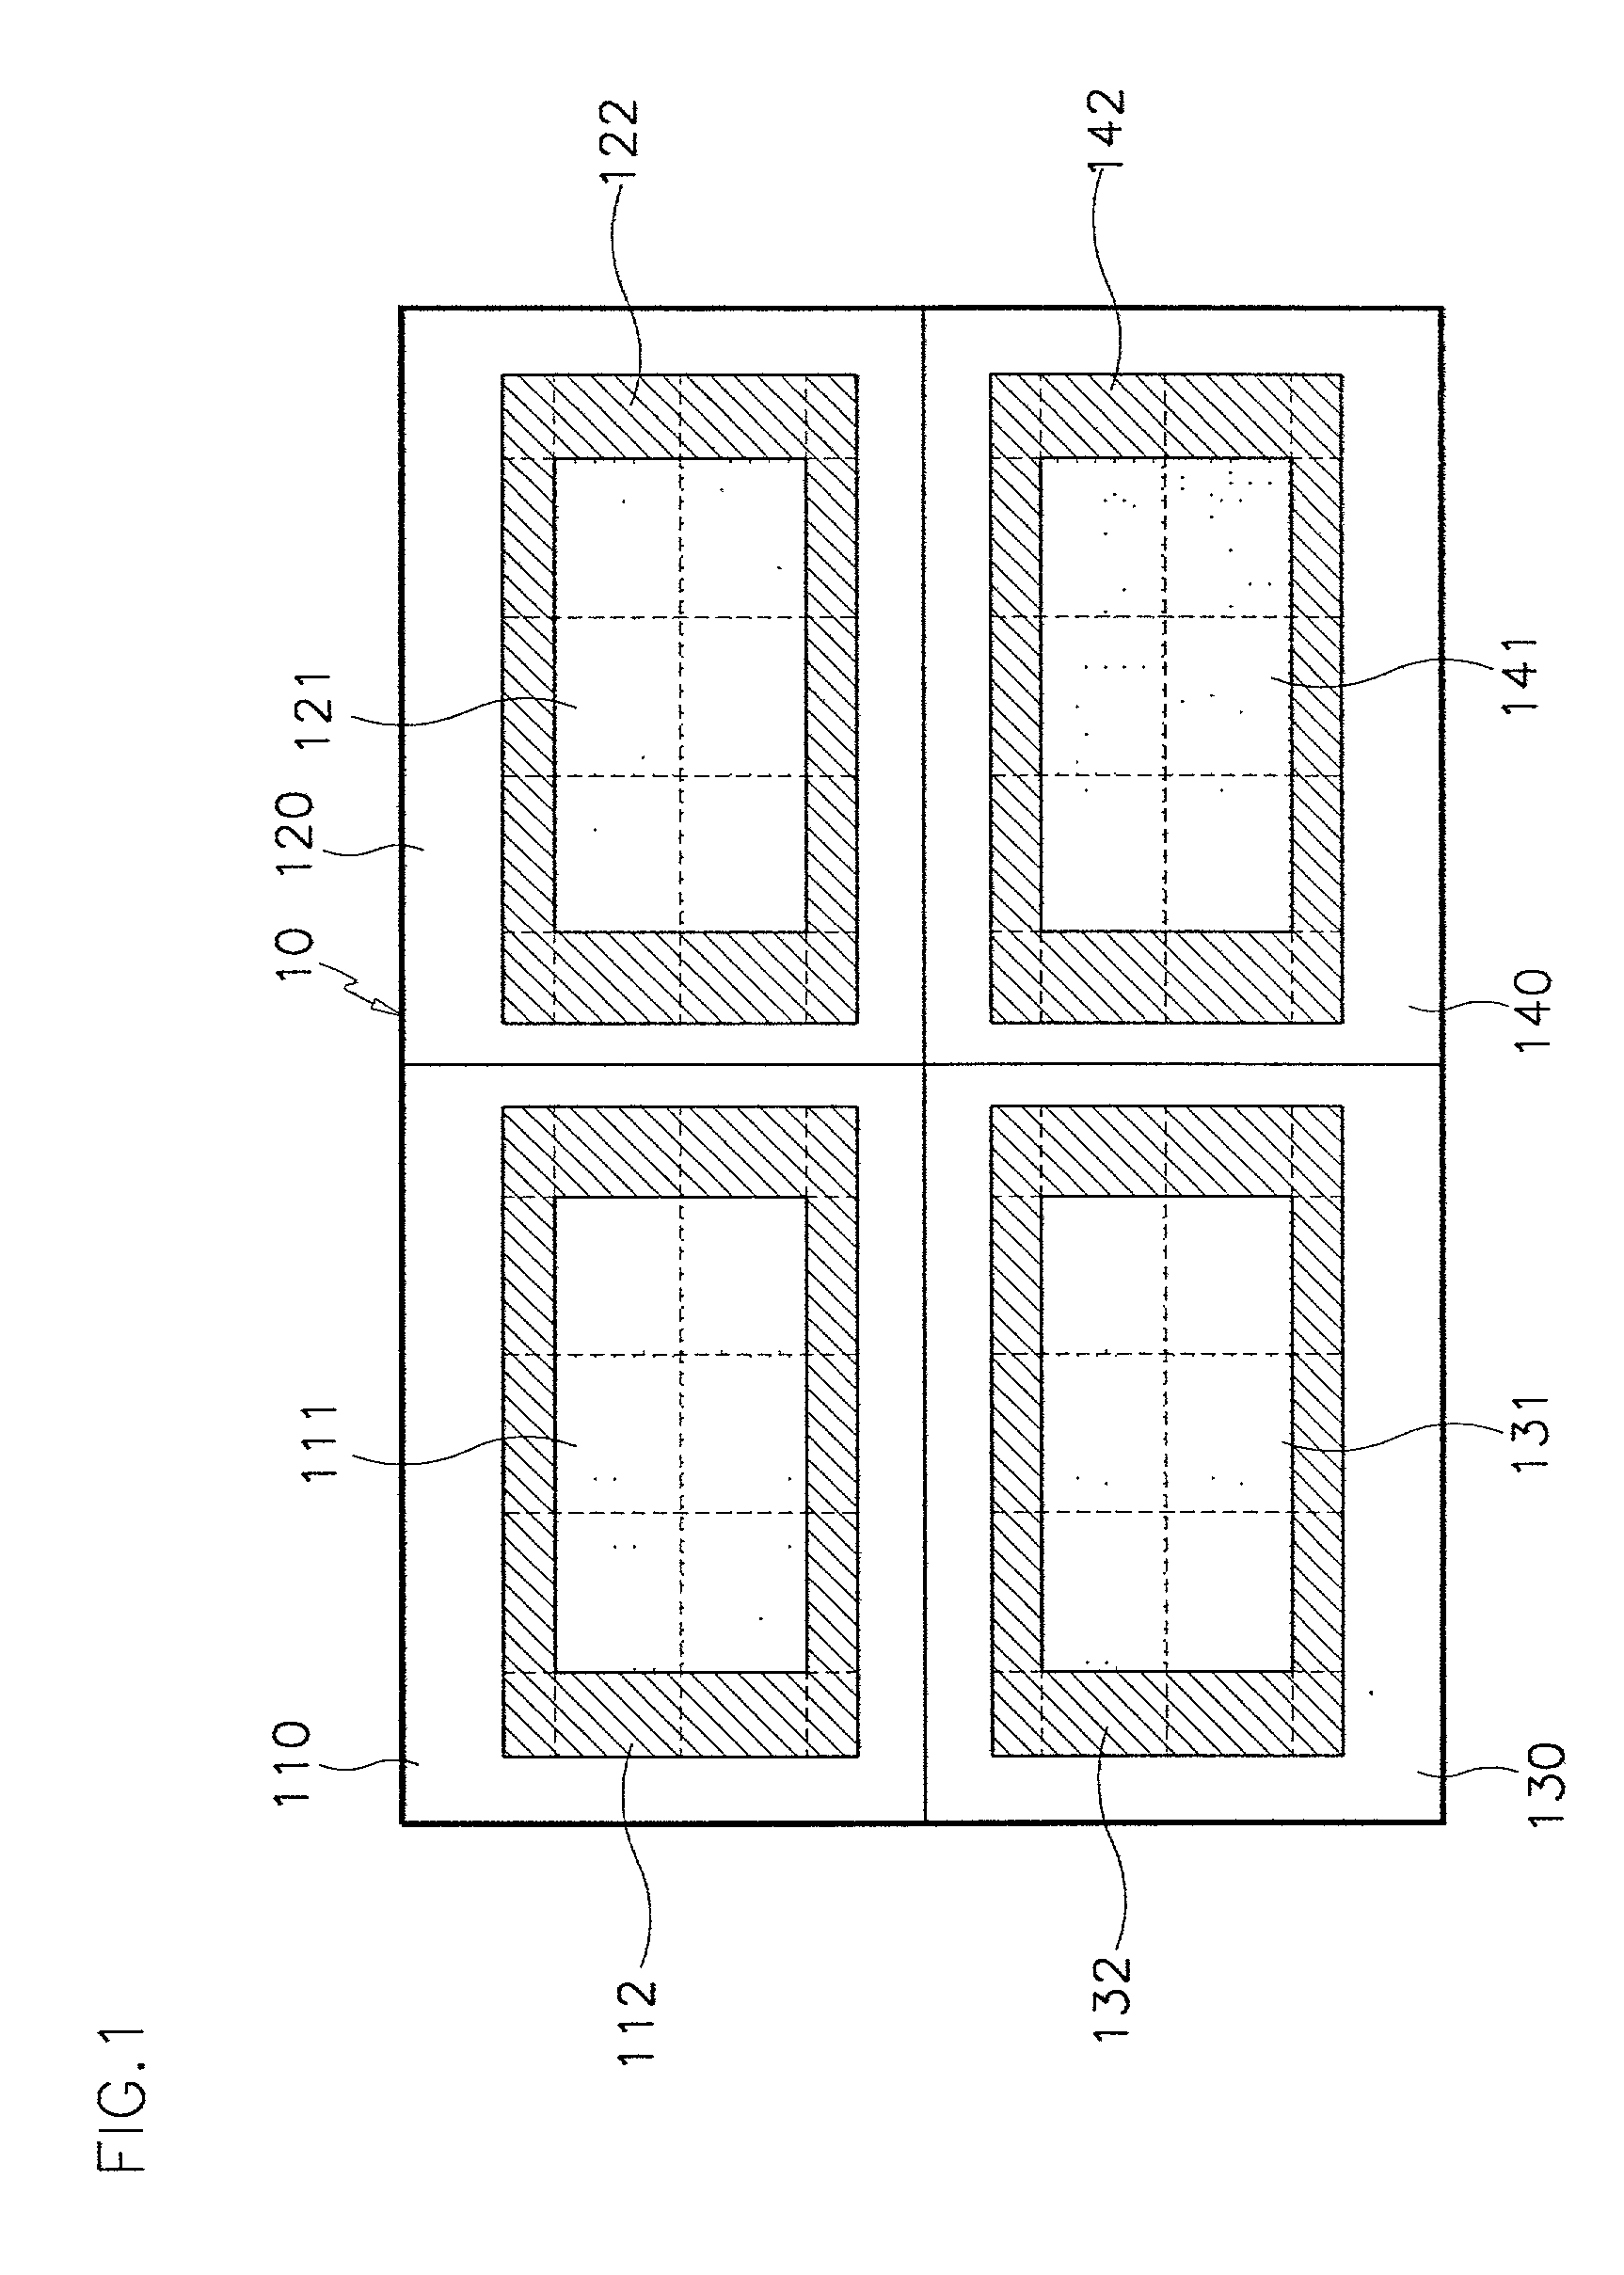 Thin film transistor array panel for a liquid crystal display and methods for manufacturing the same